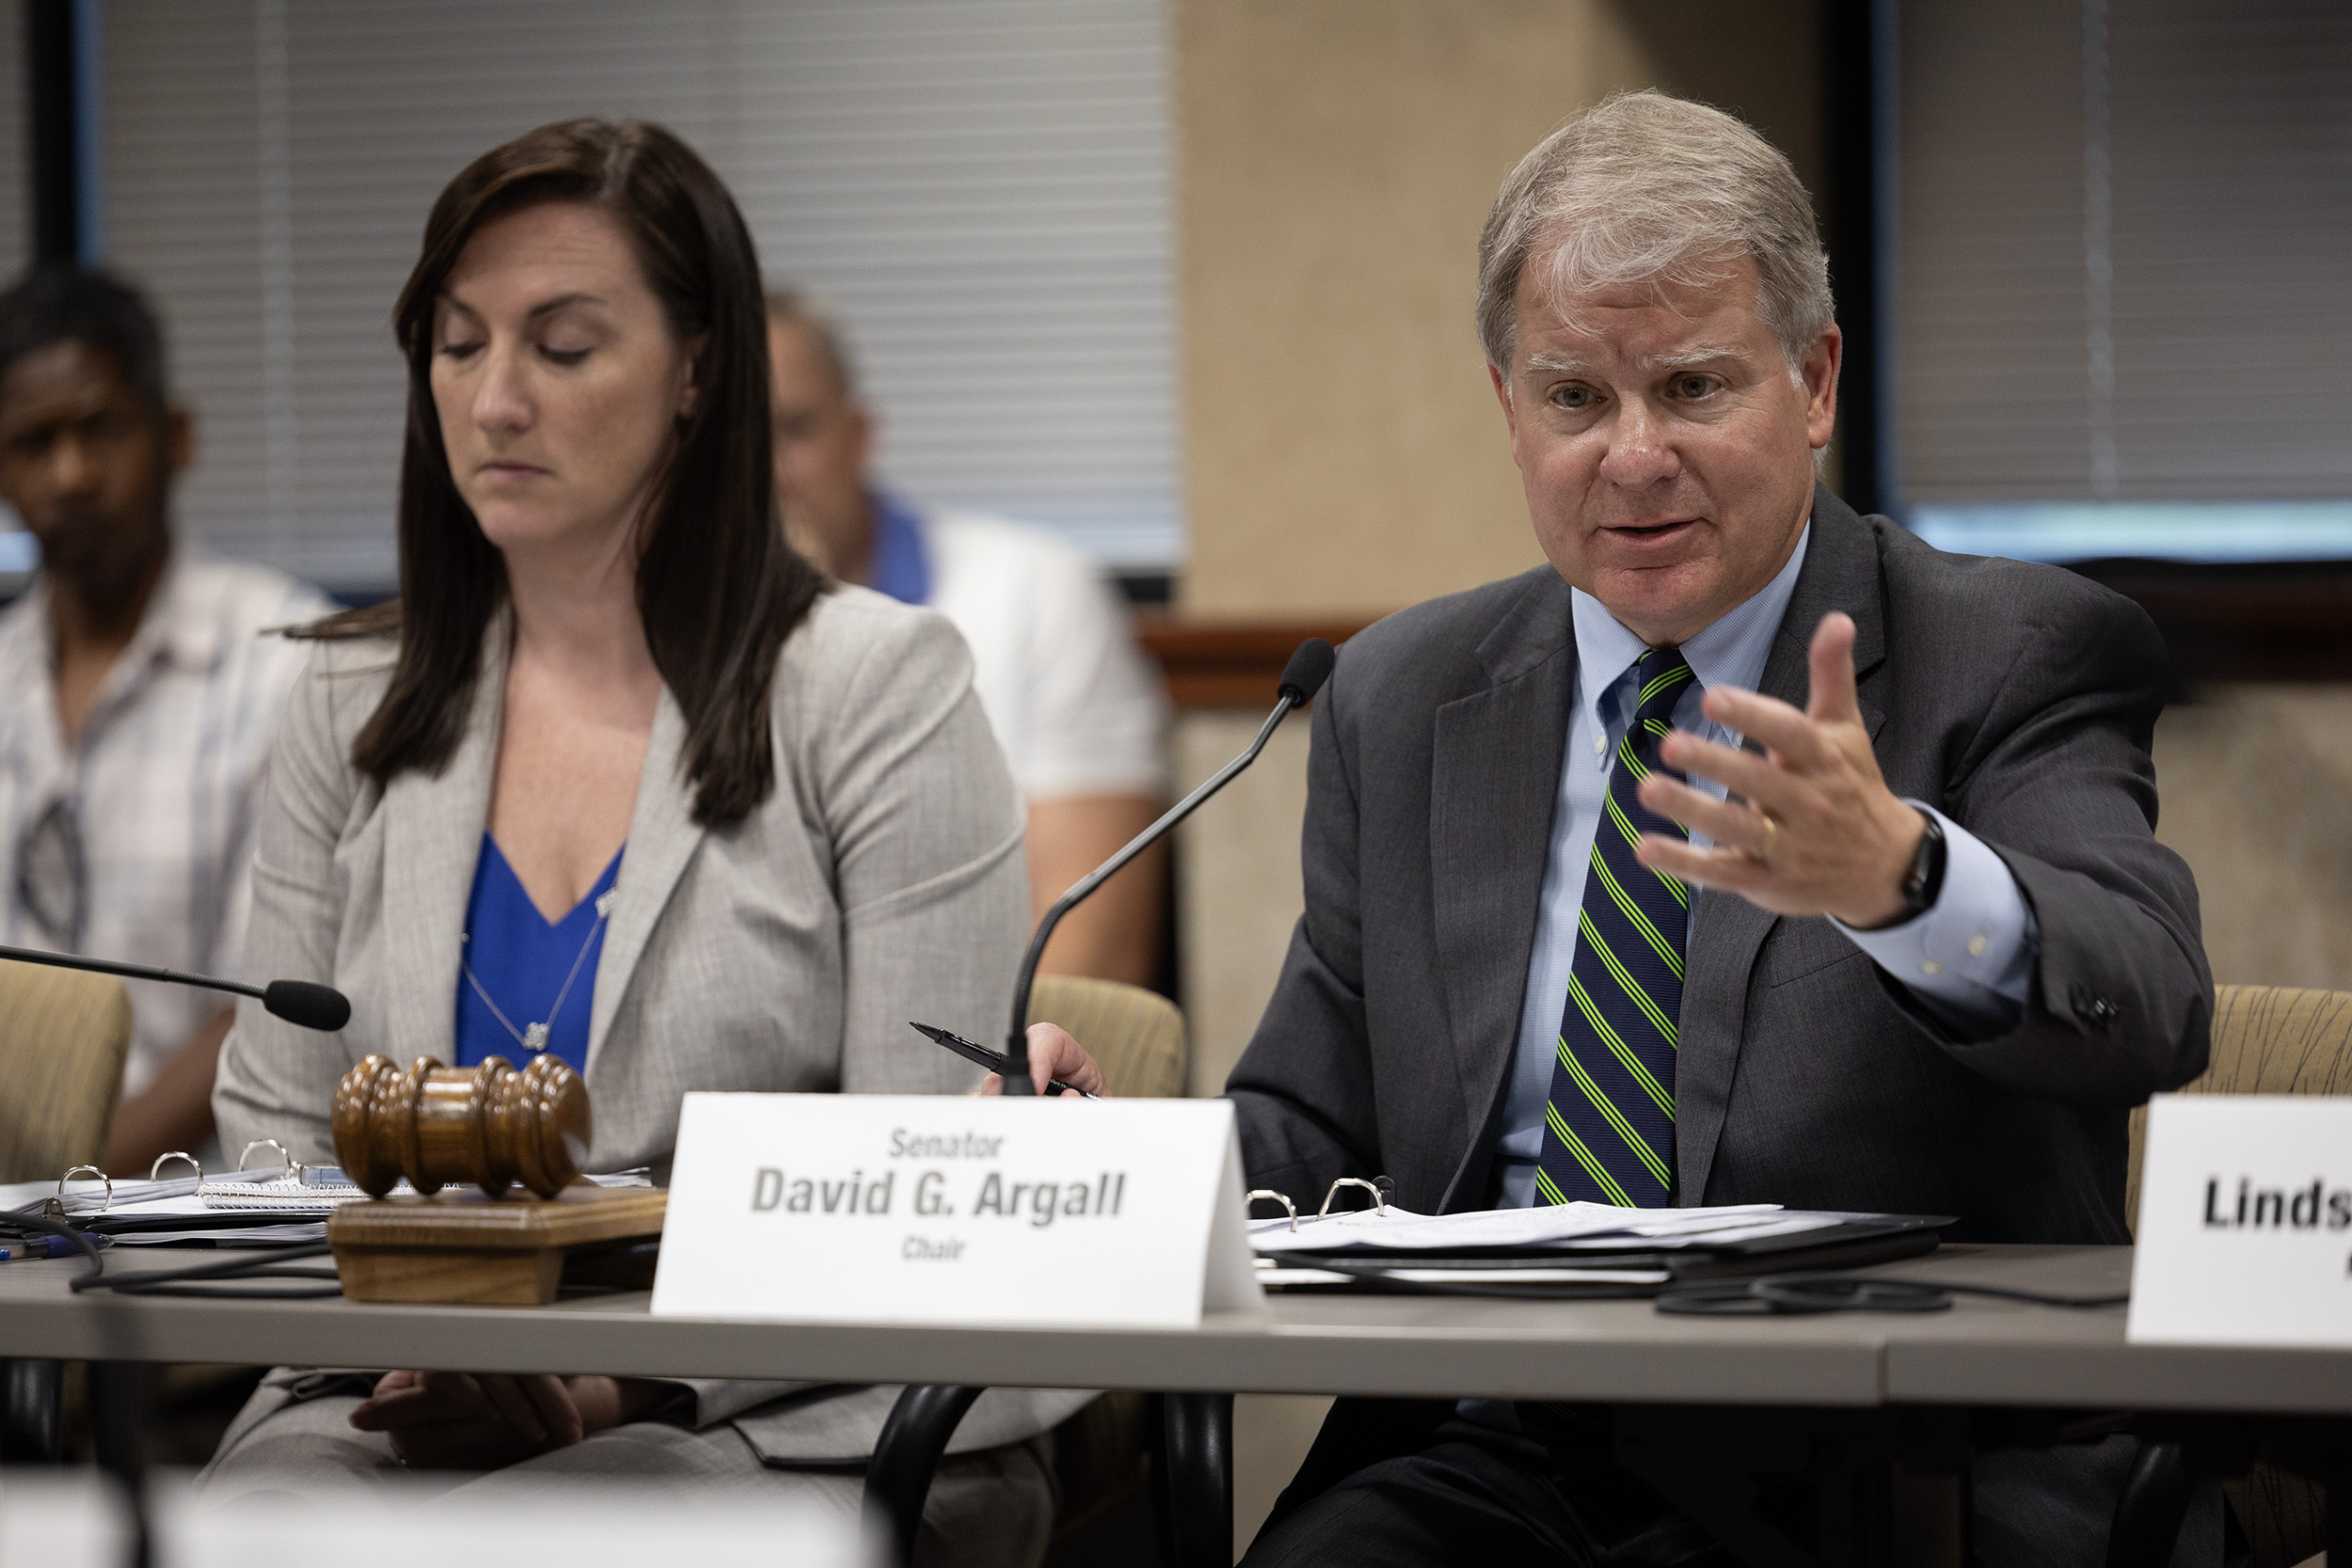  Republican state Sen. David Argall is chair of the Senate Education Committee.